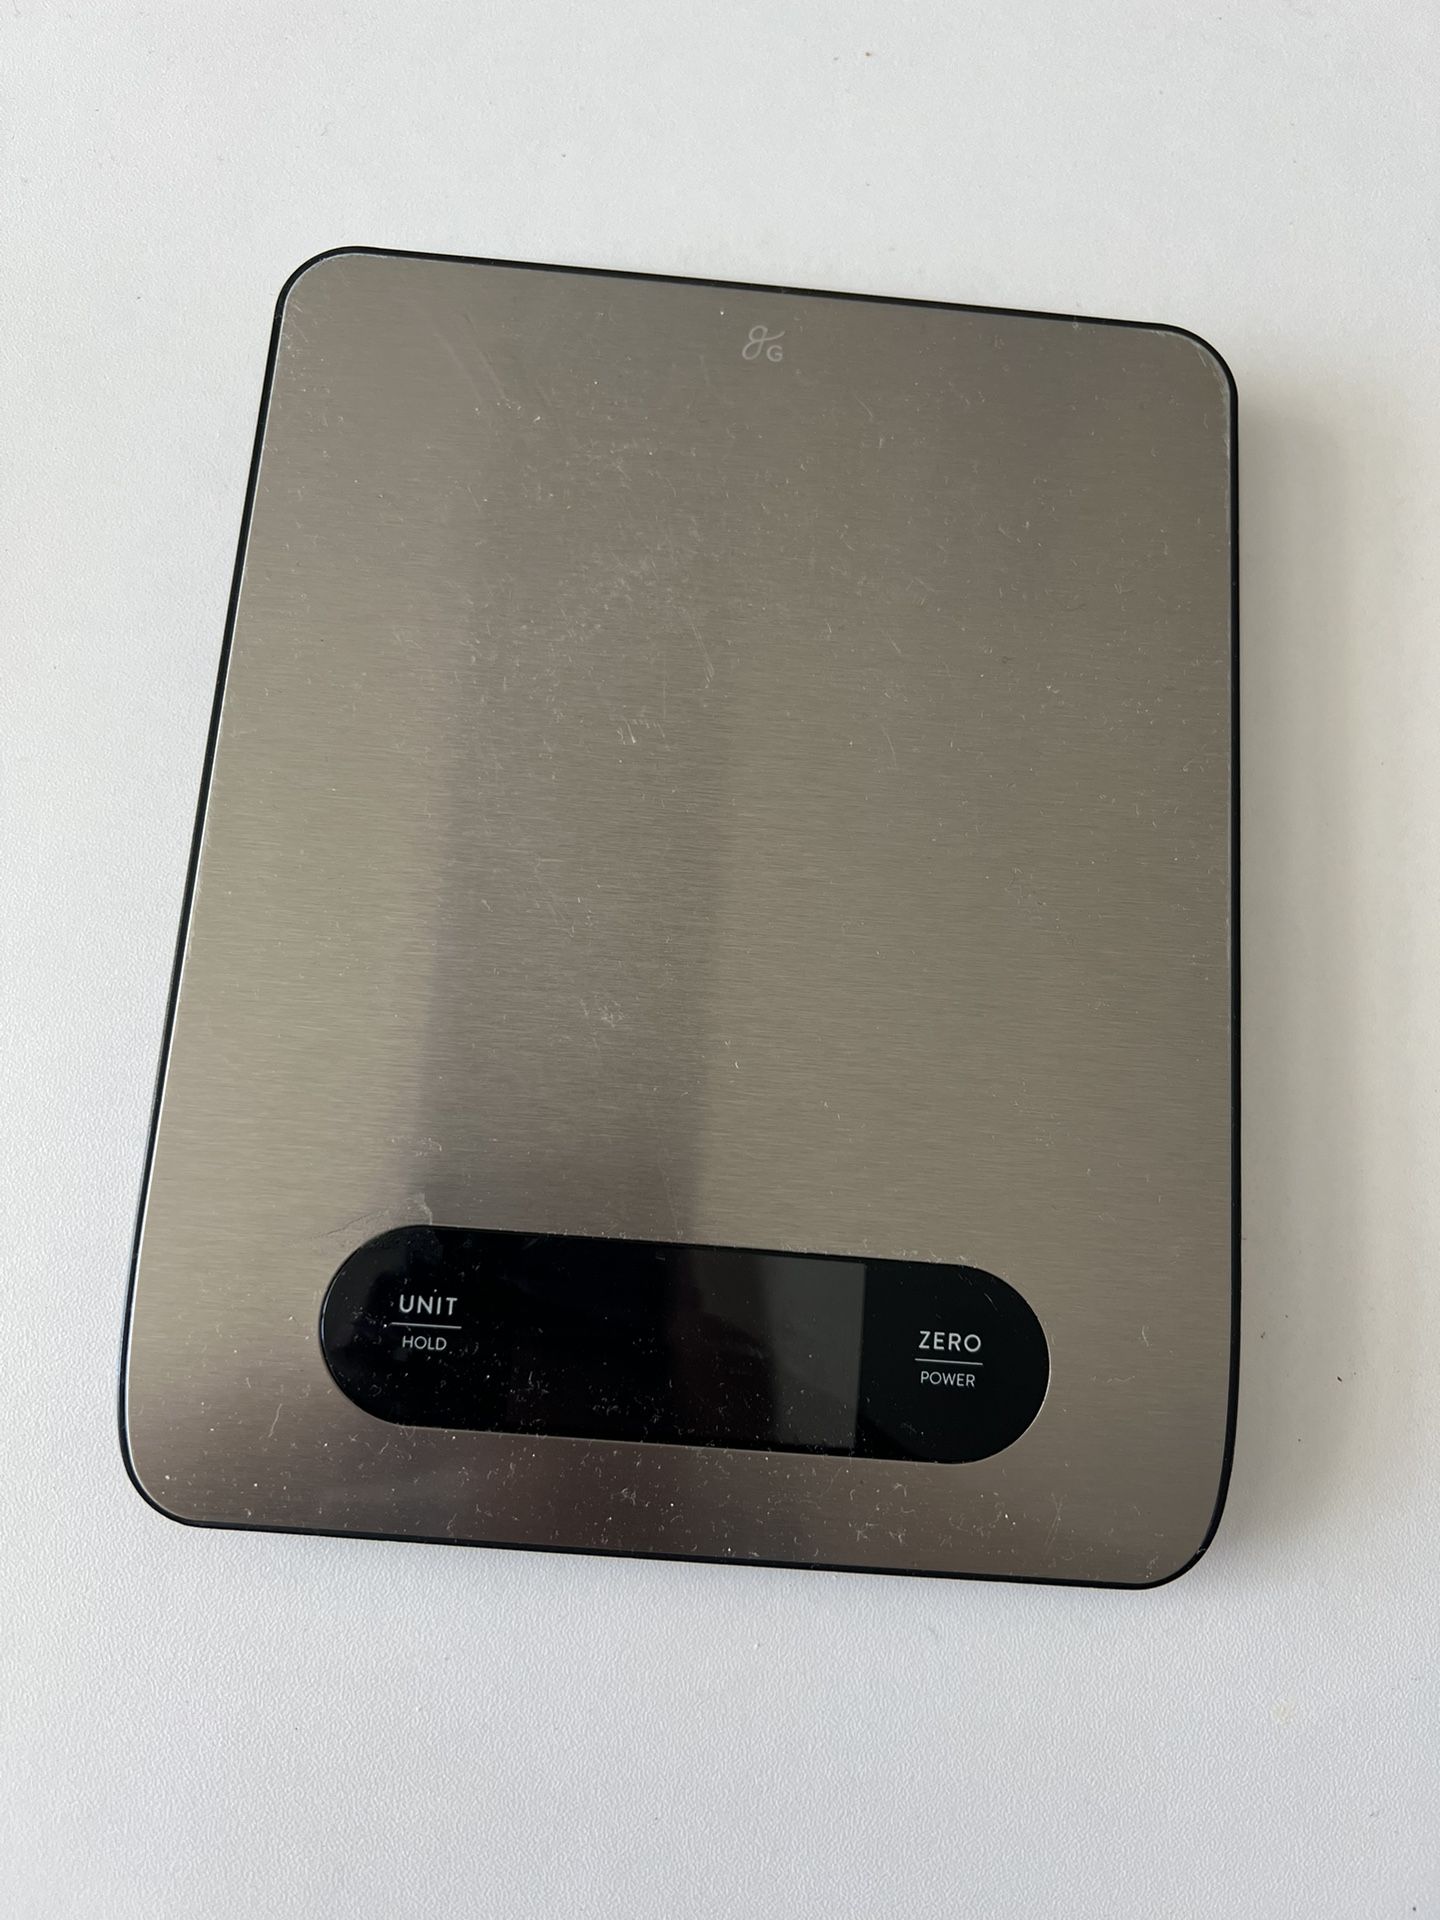 Greater Goods Digital Kitchen Scale